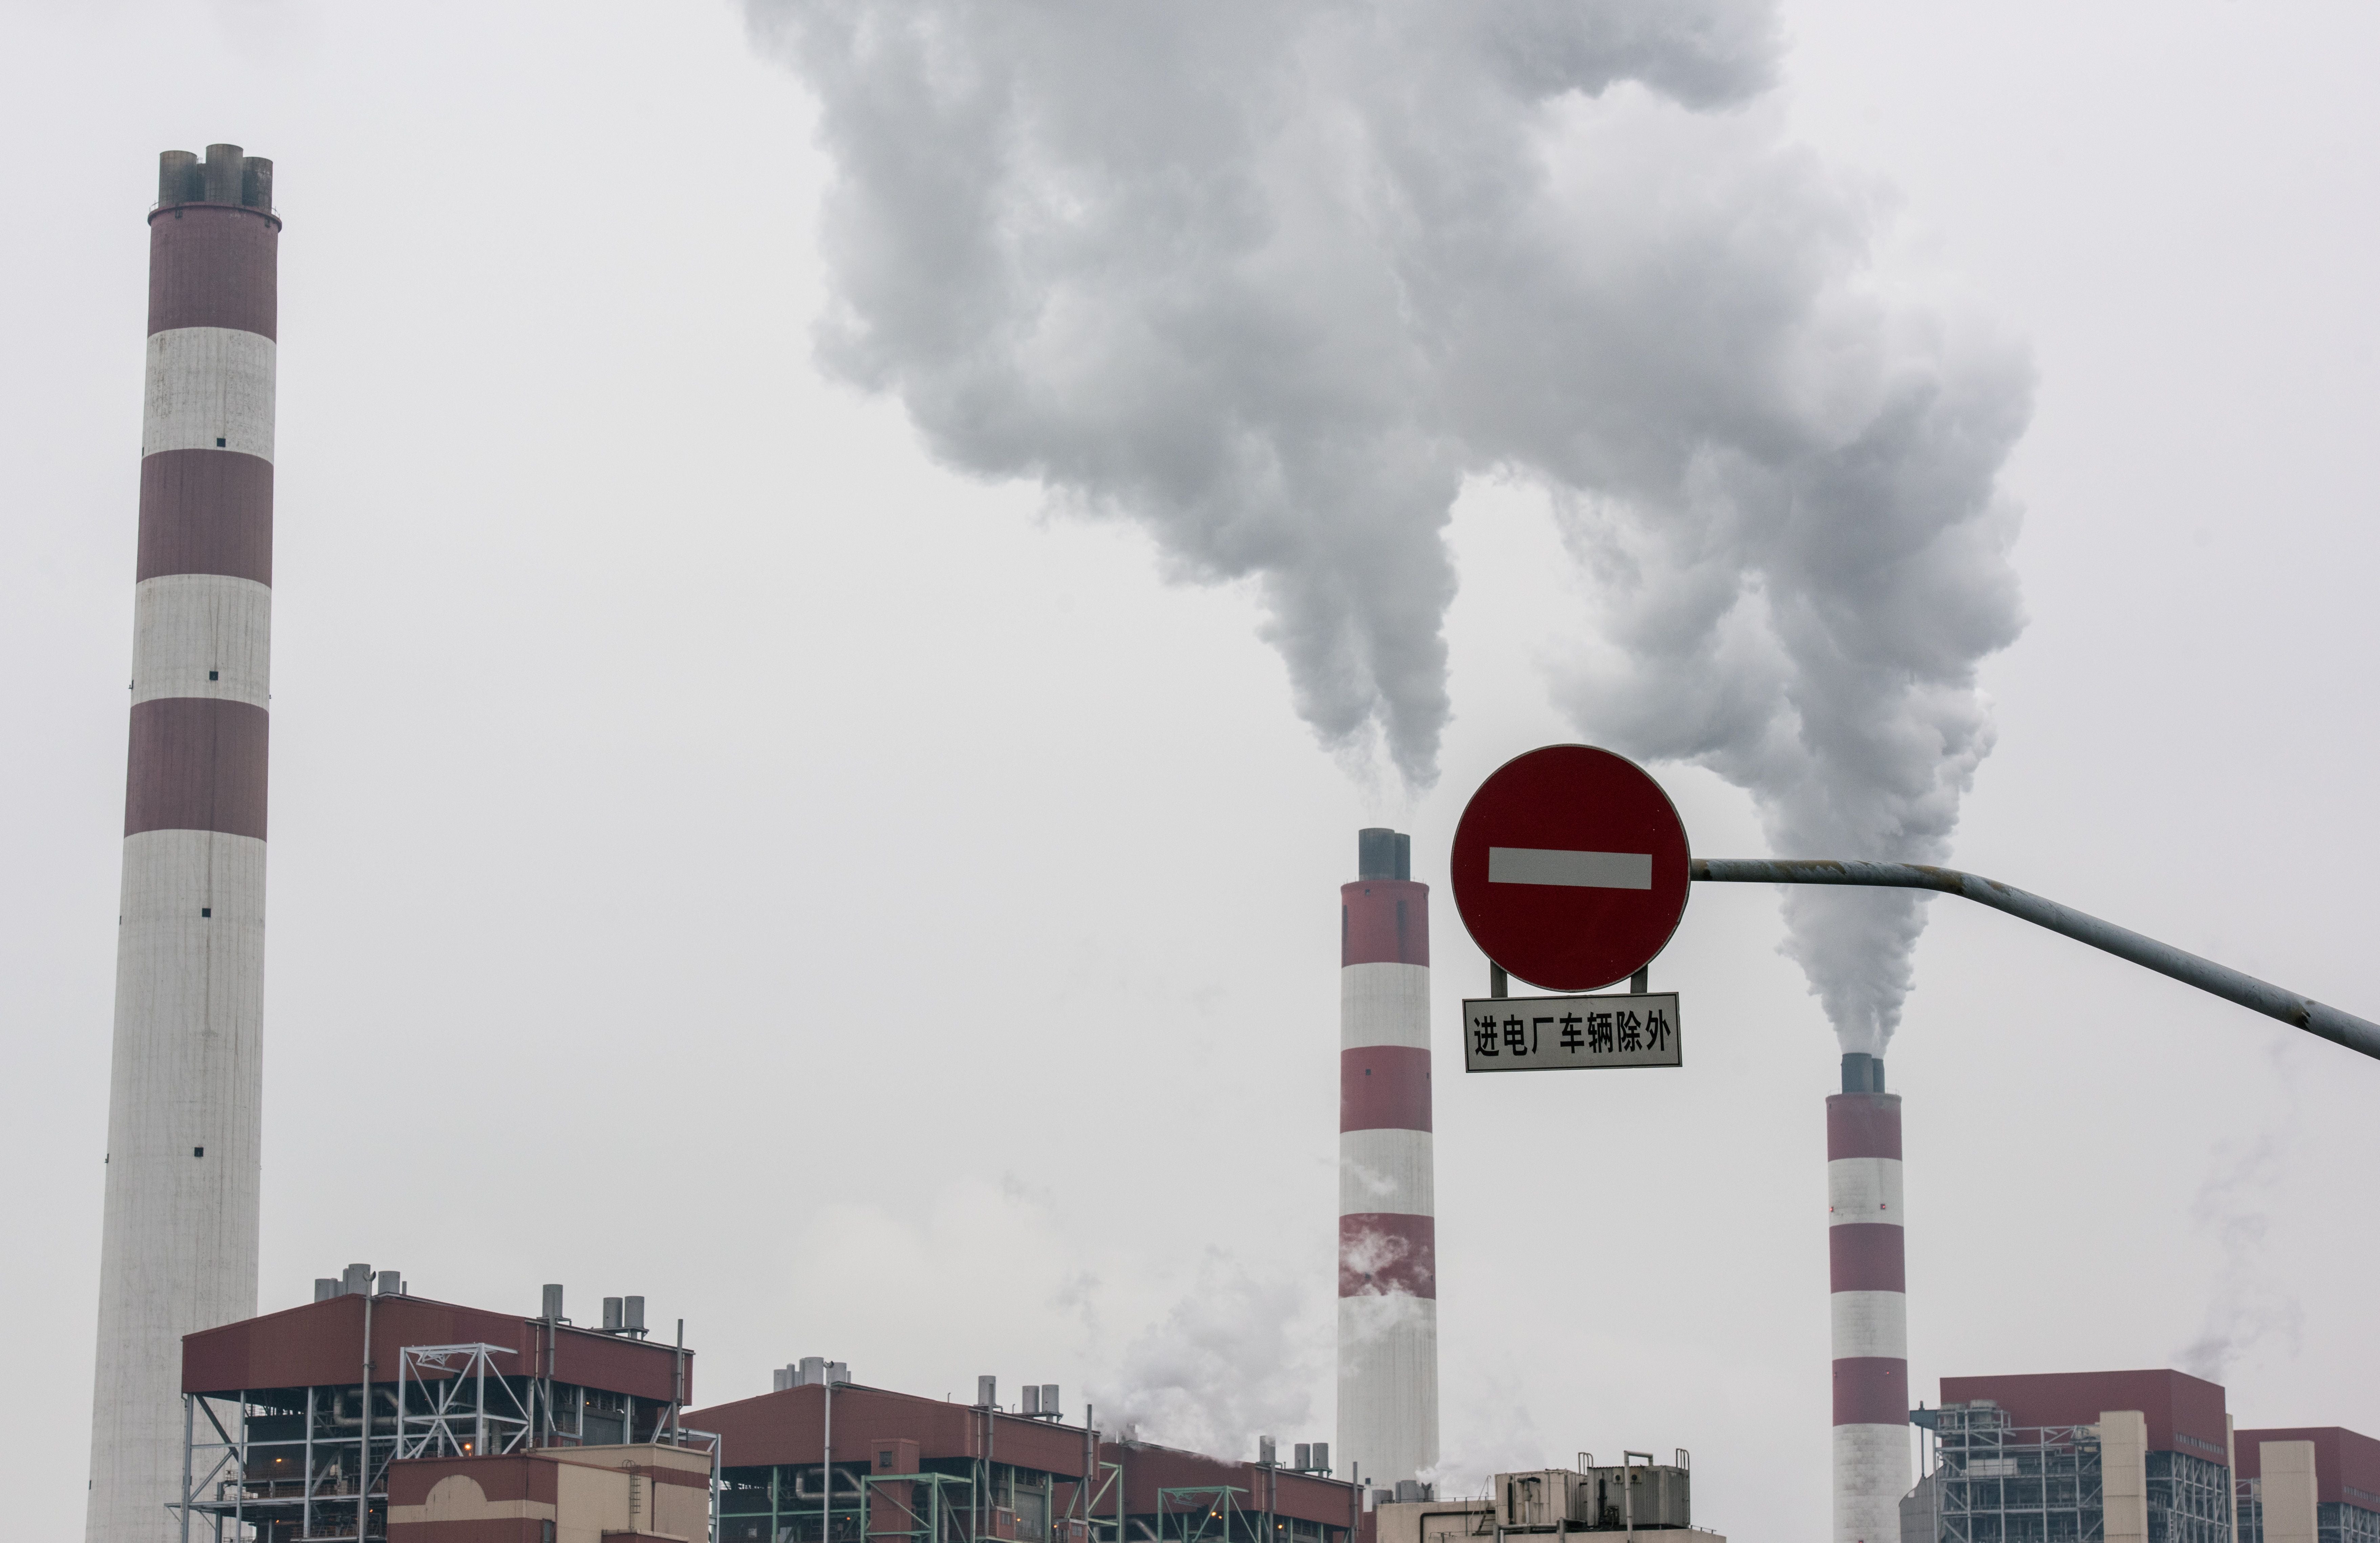 A phase-out of coal-fired power will be vital to meeting world’s climate goals, scientists say